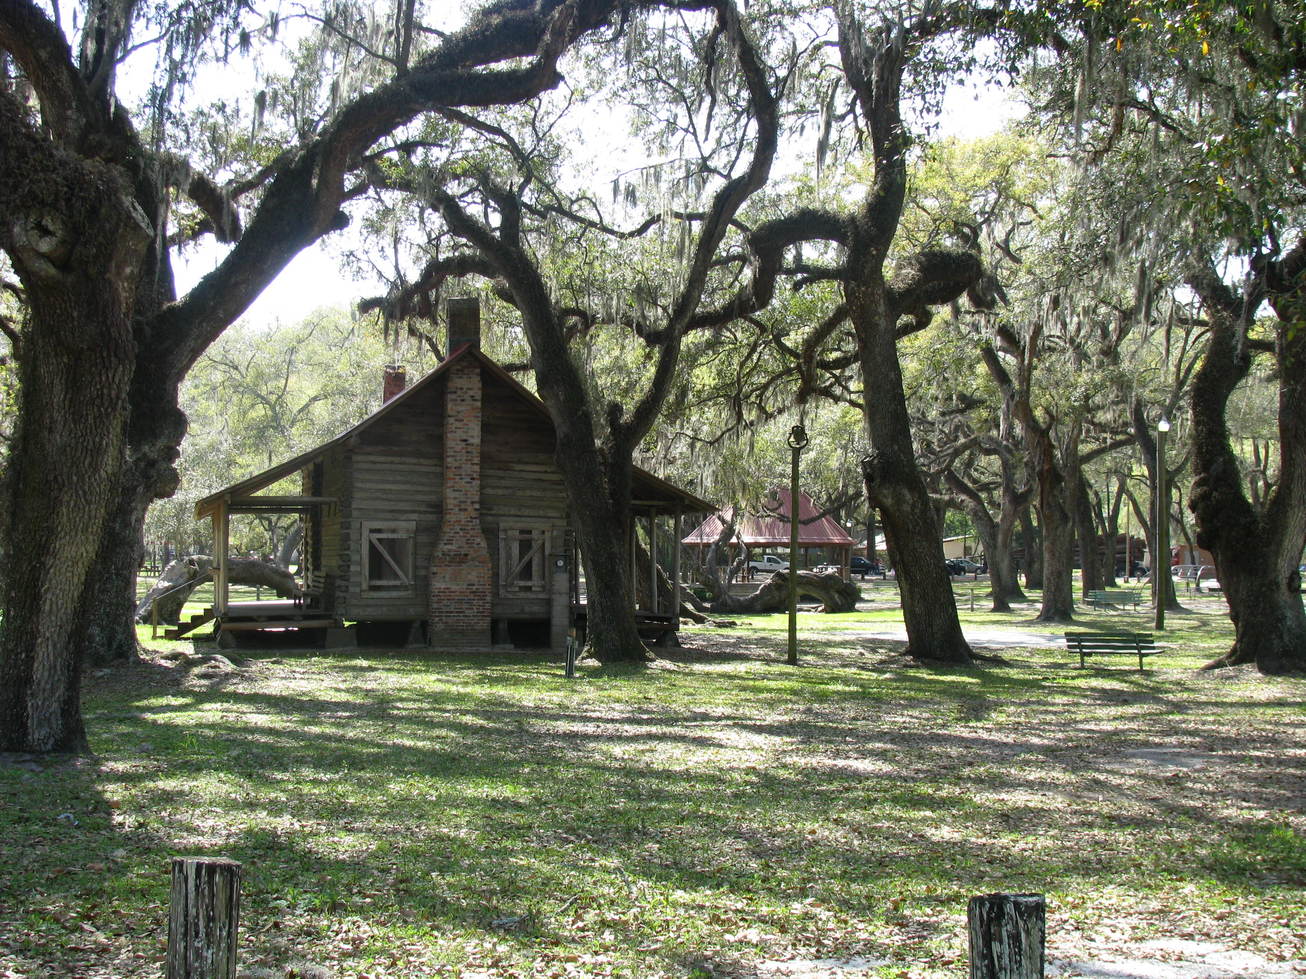 Mayo, FL: Old cabin in Mayo town park with an array of beautiful figured trees.